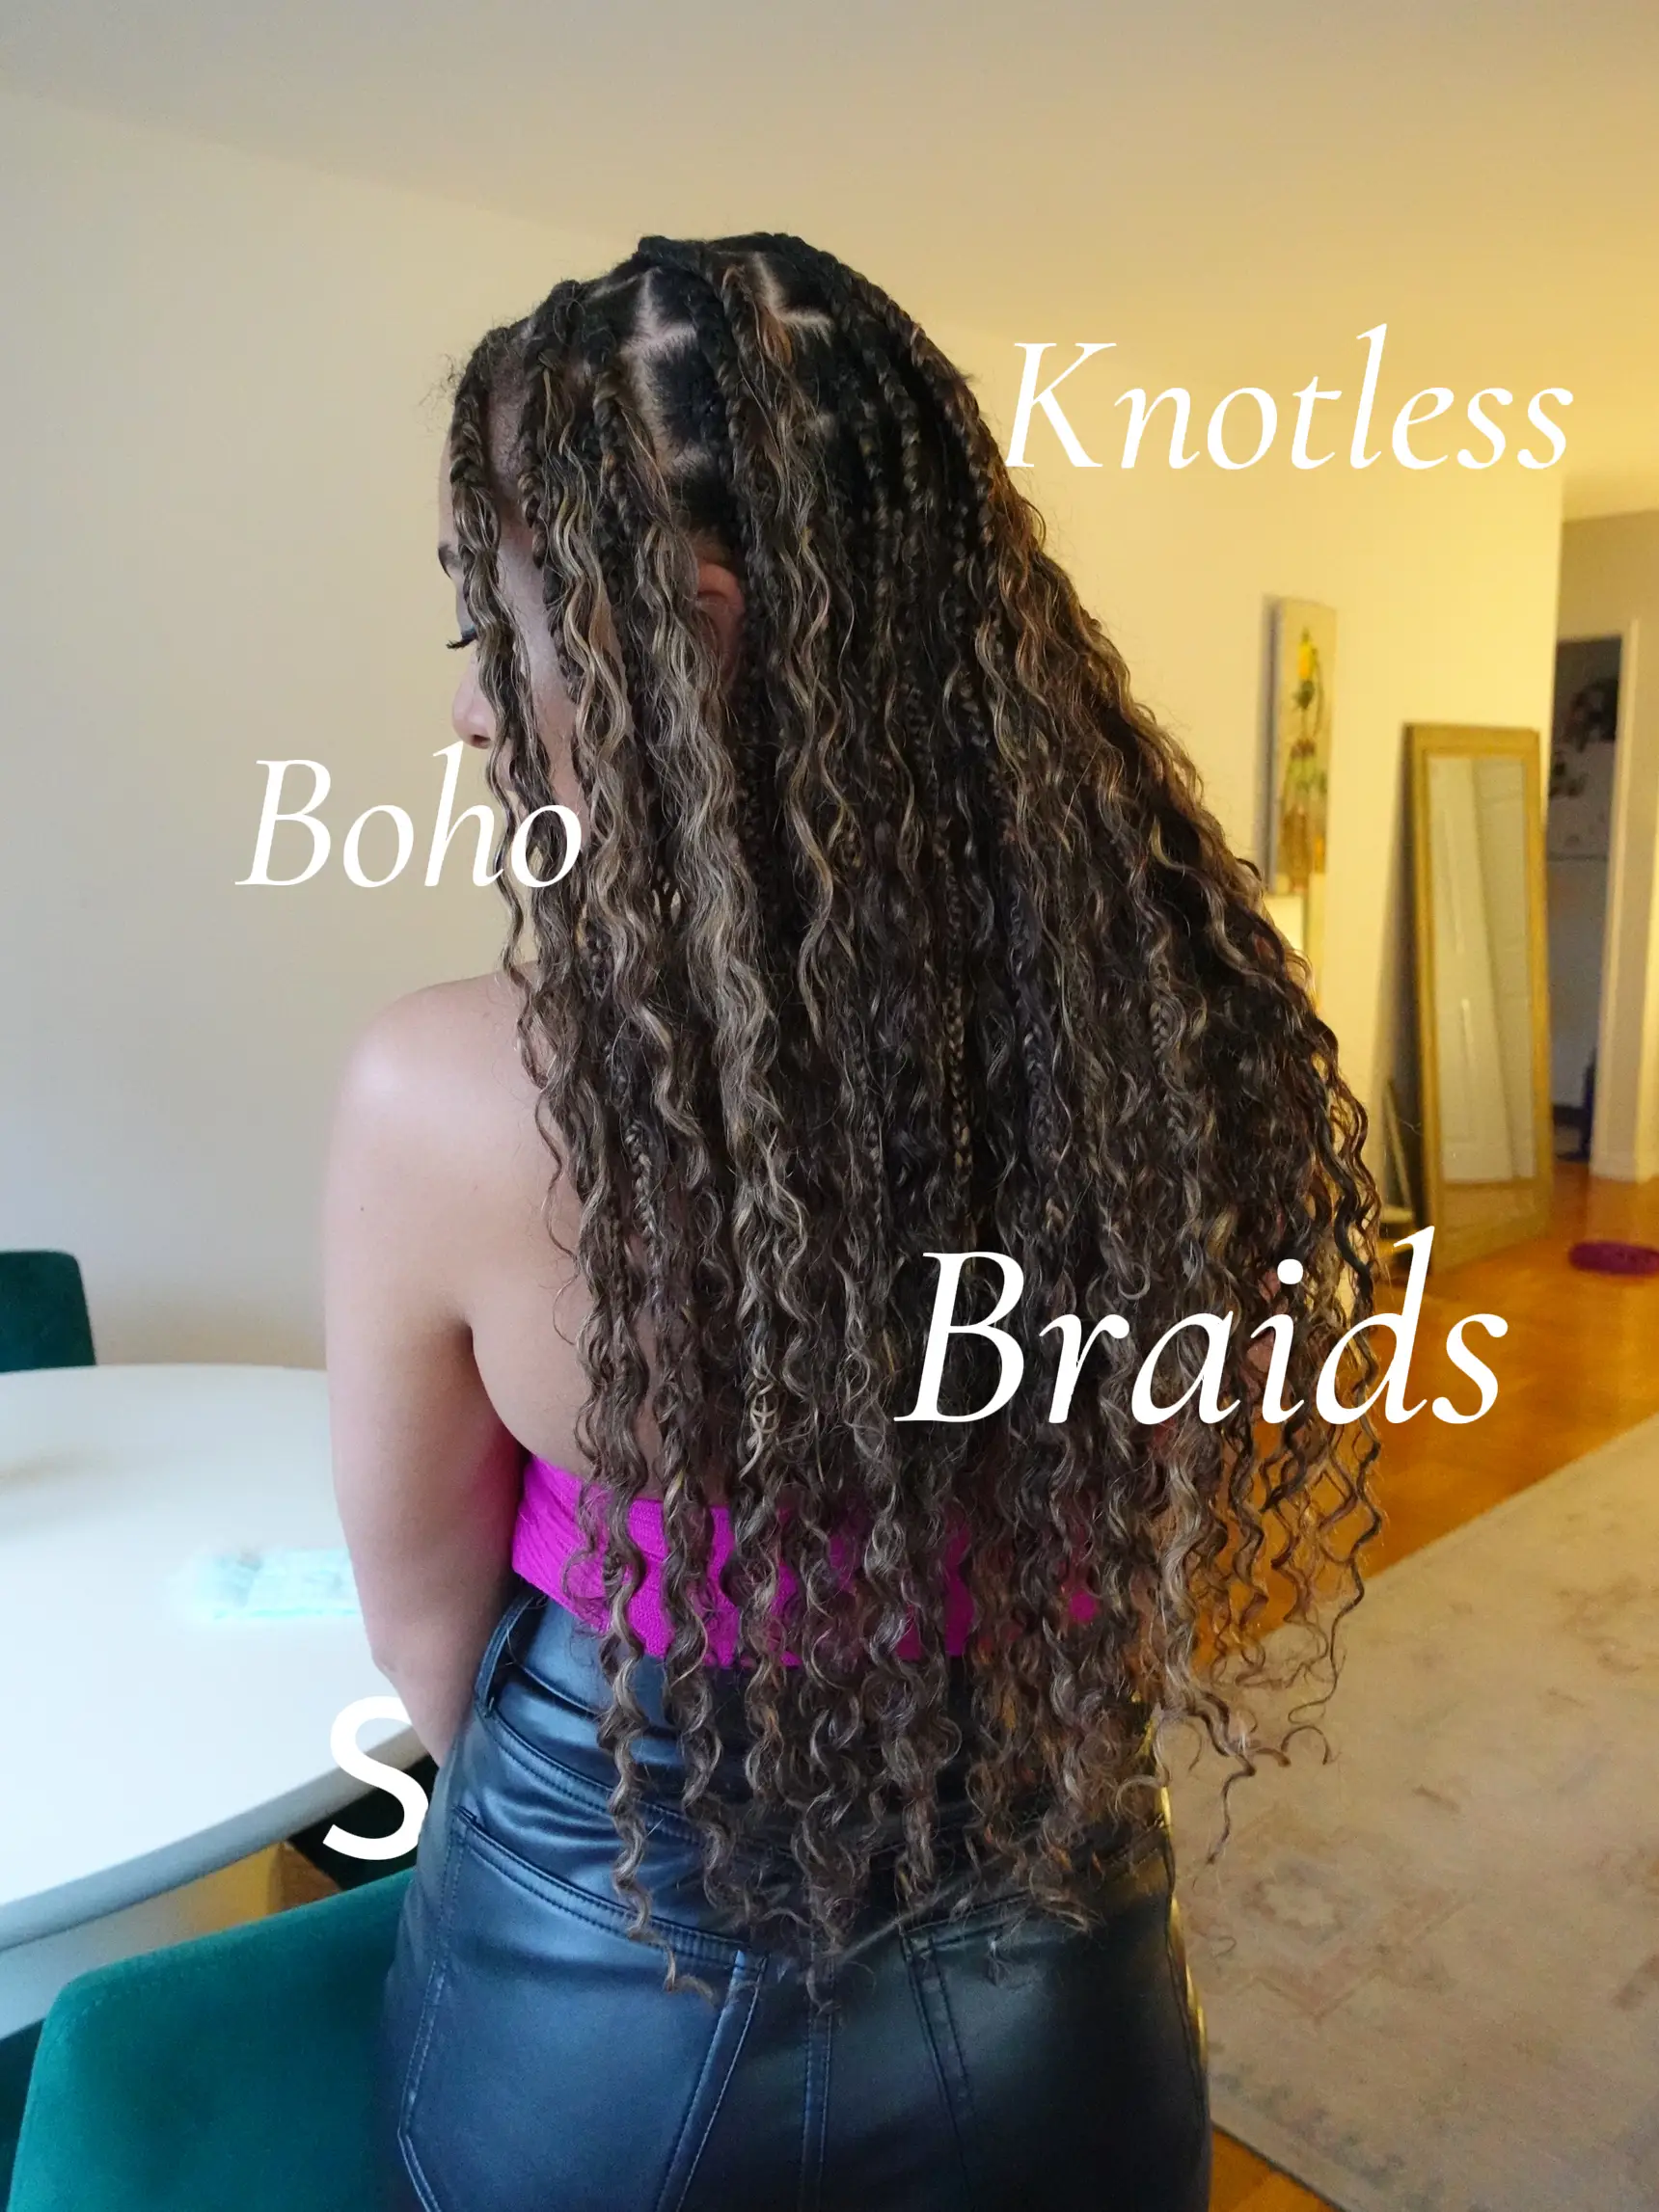 What hair to use for boho braids and how to maintain them